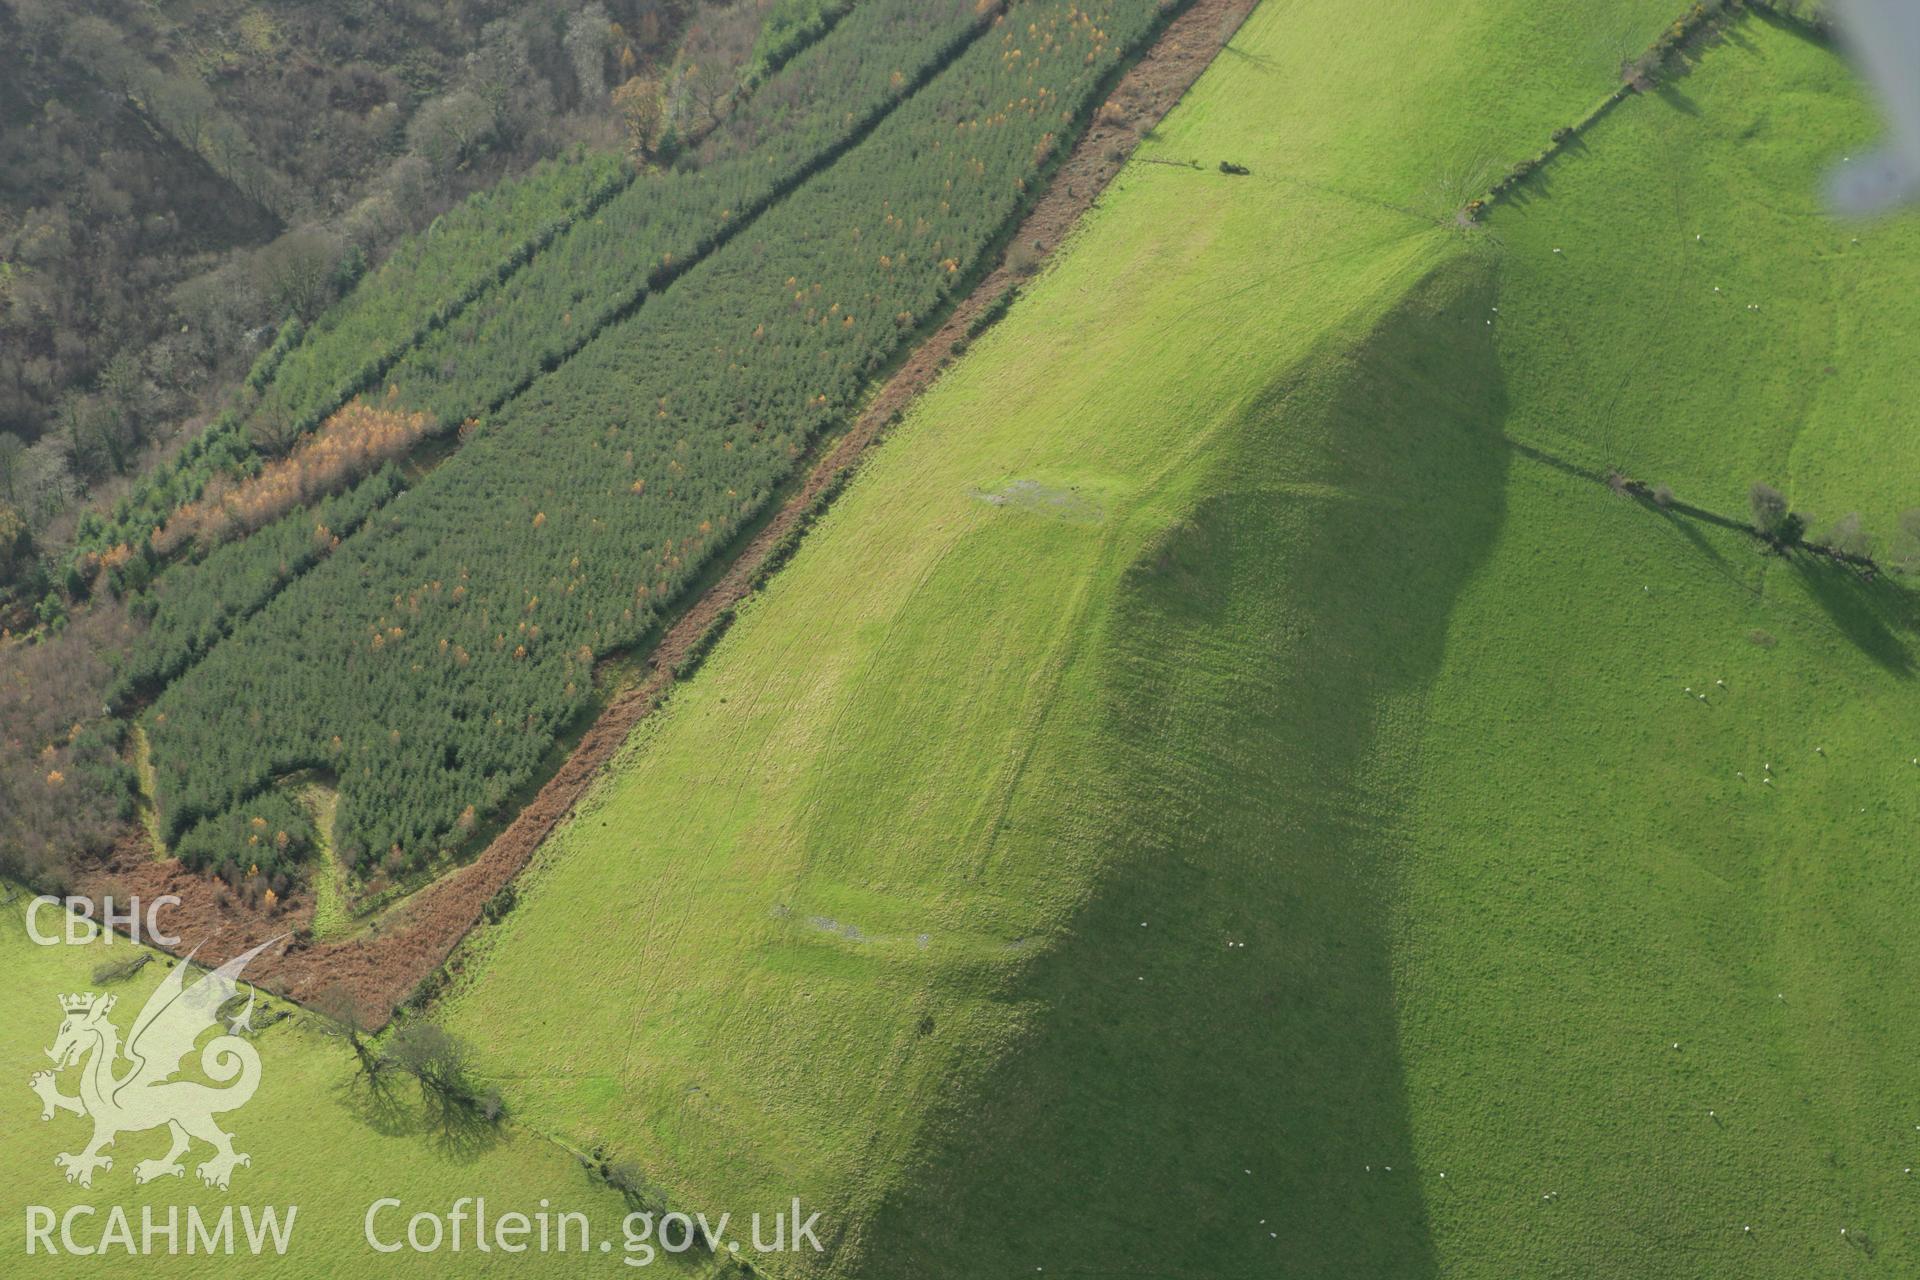 RCAHMW colour oblique photograph of Pen y Gaer hillfort. Taken by Toby Driver on 29/11/2007.